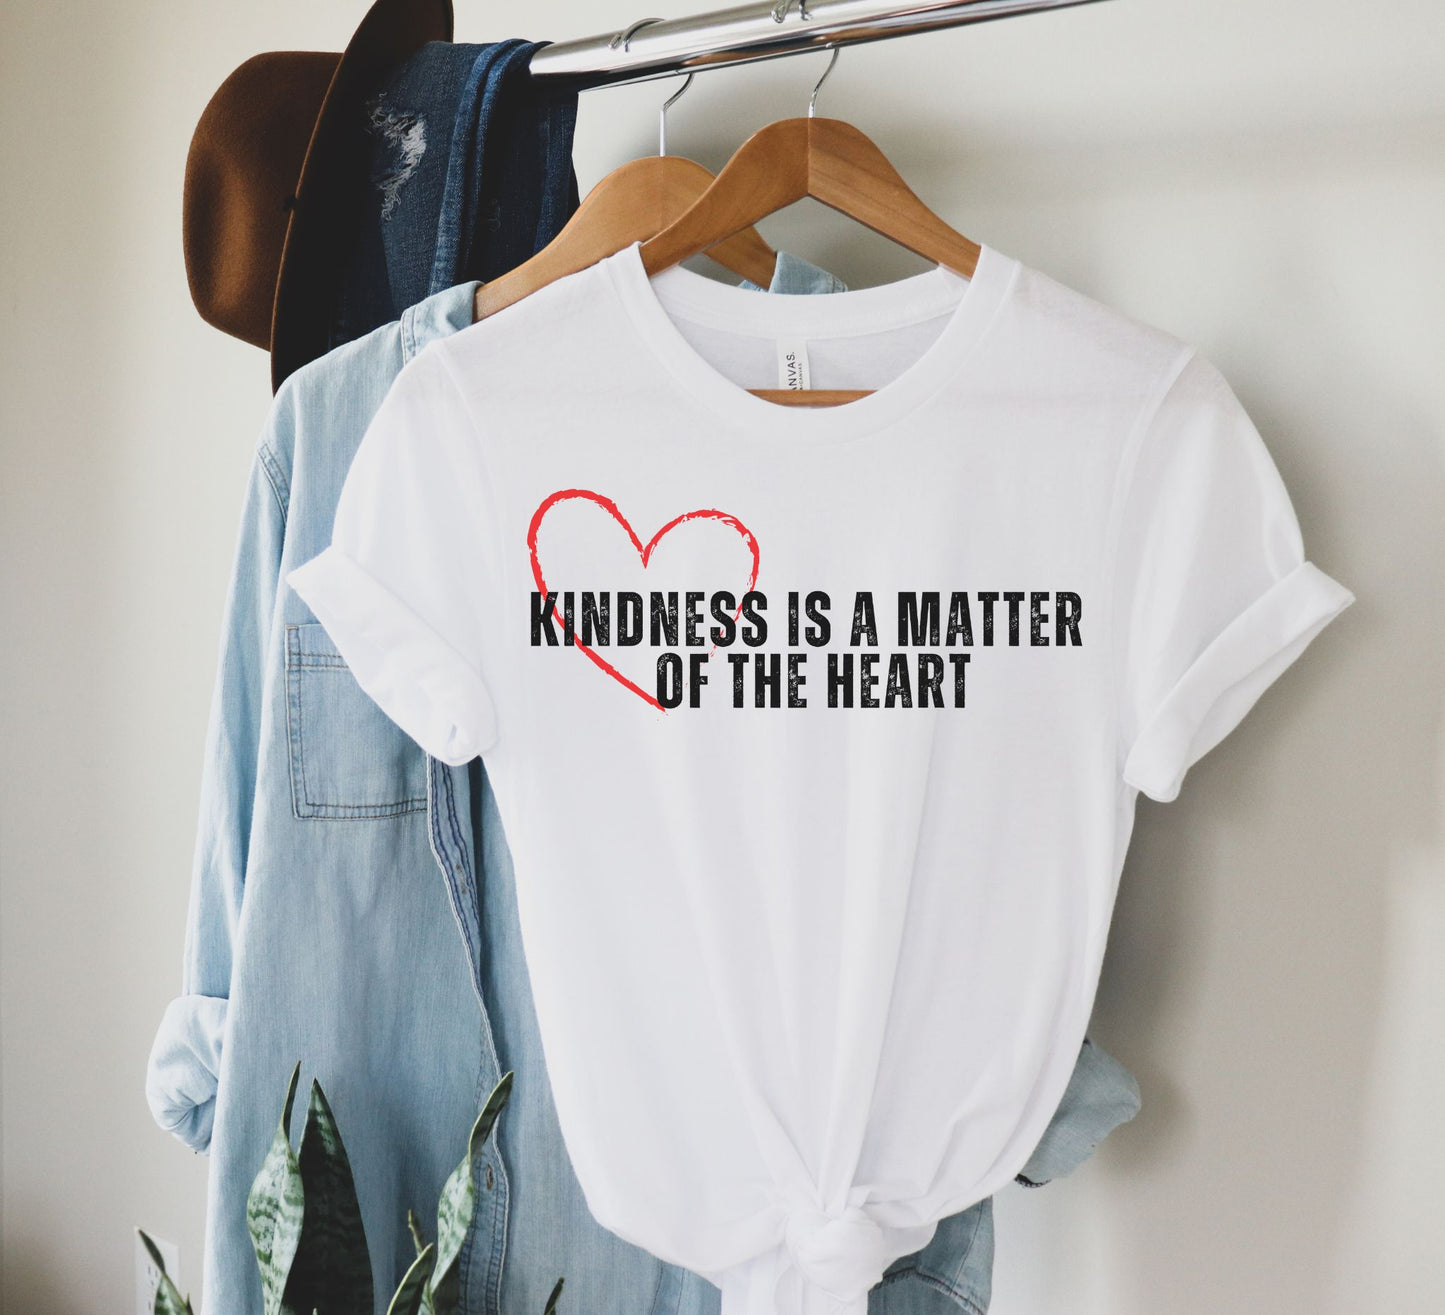 Kindness is the Matter of the Heart  T-Shirt  - Red Hot Heart